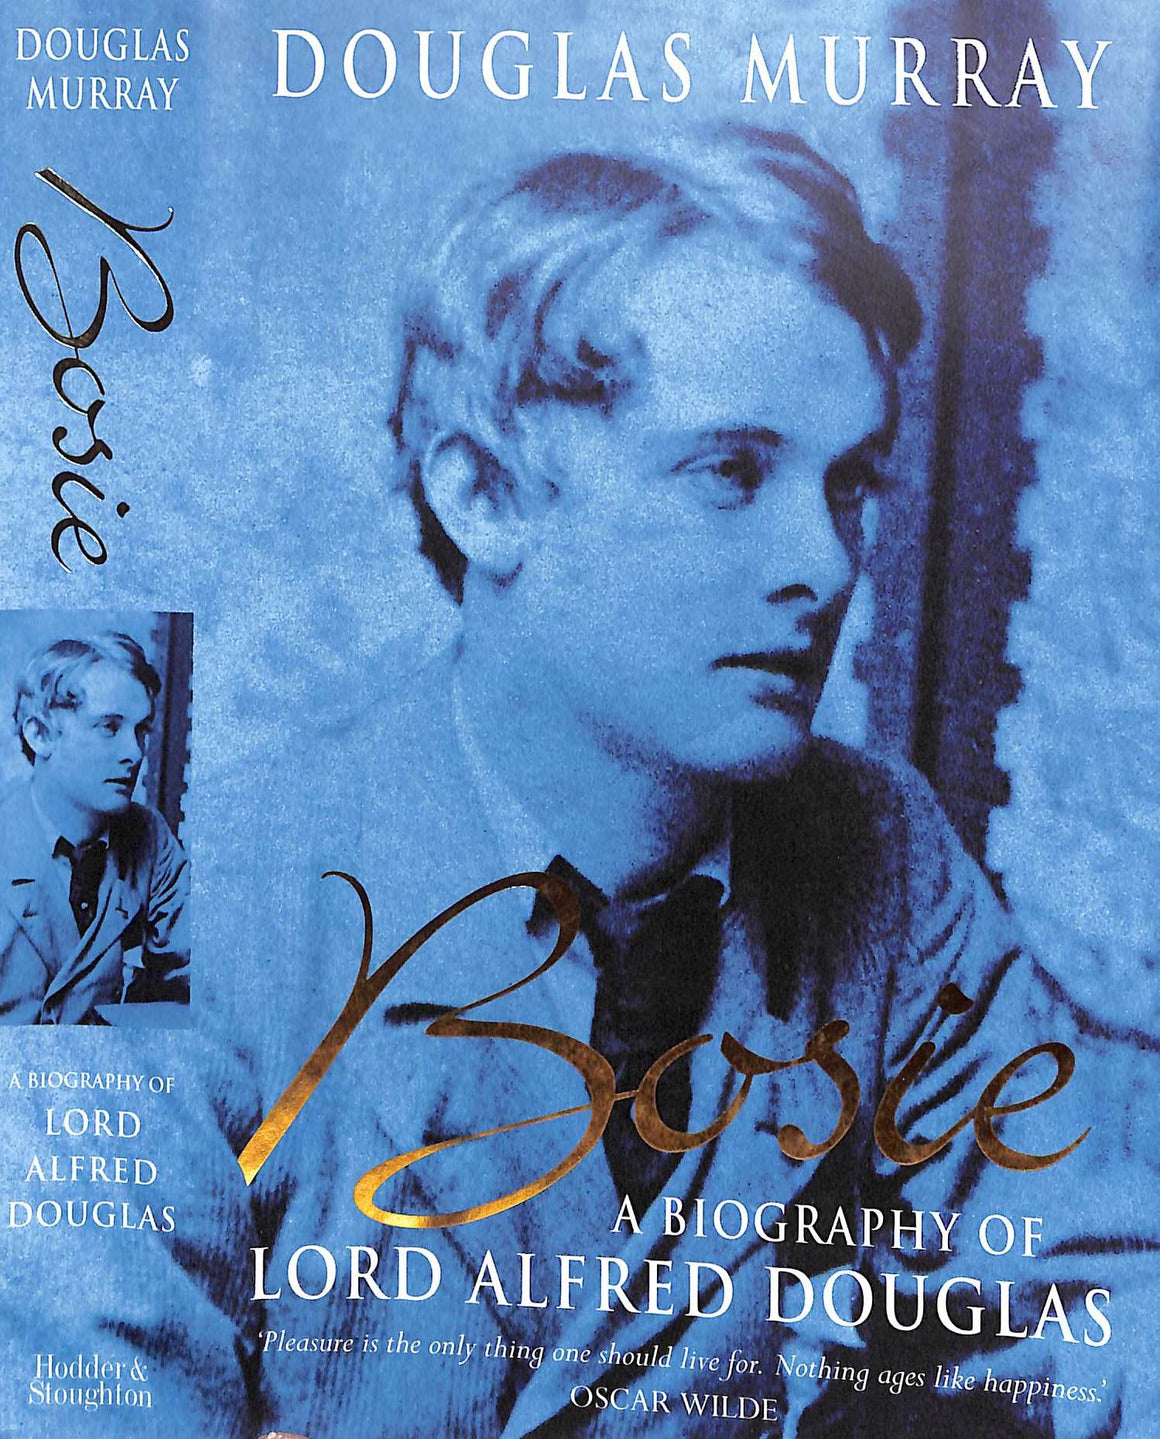 "Bosie A Biography Of Lord Alfred Douglas" 2000 MURRAY, Douglas (SIGNED) (SOLD)